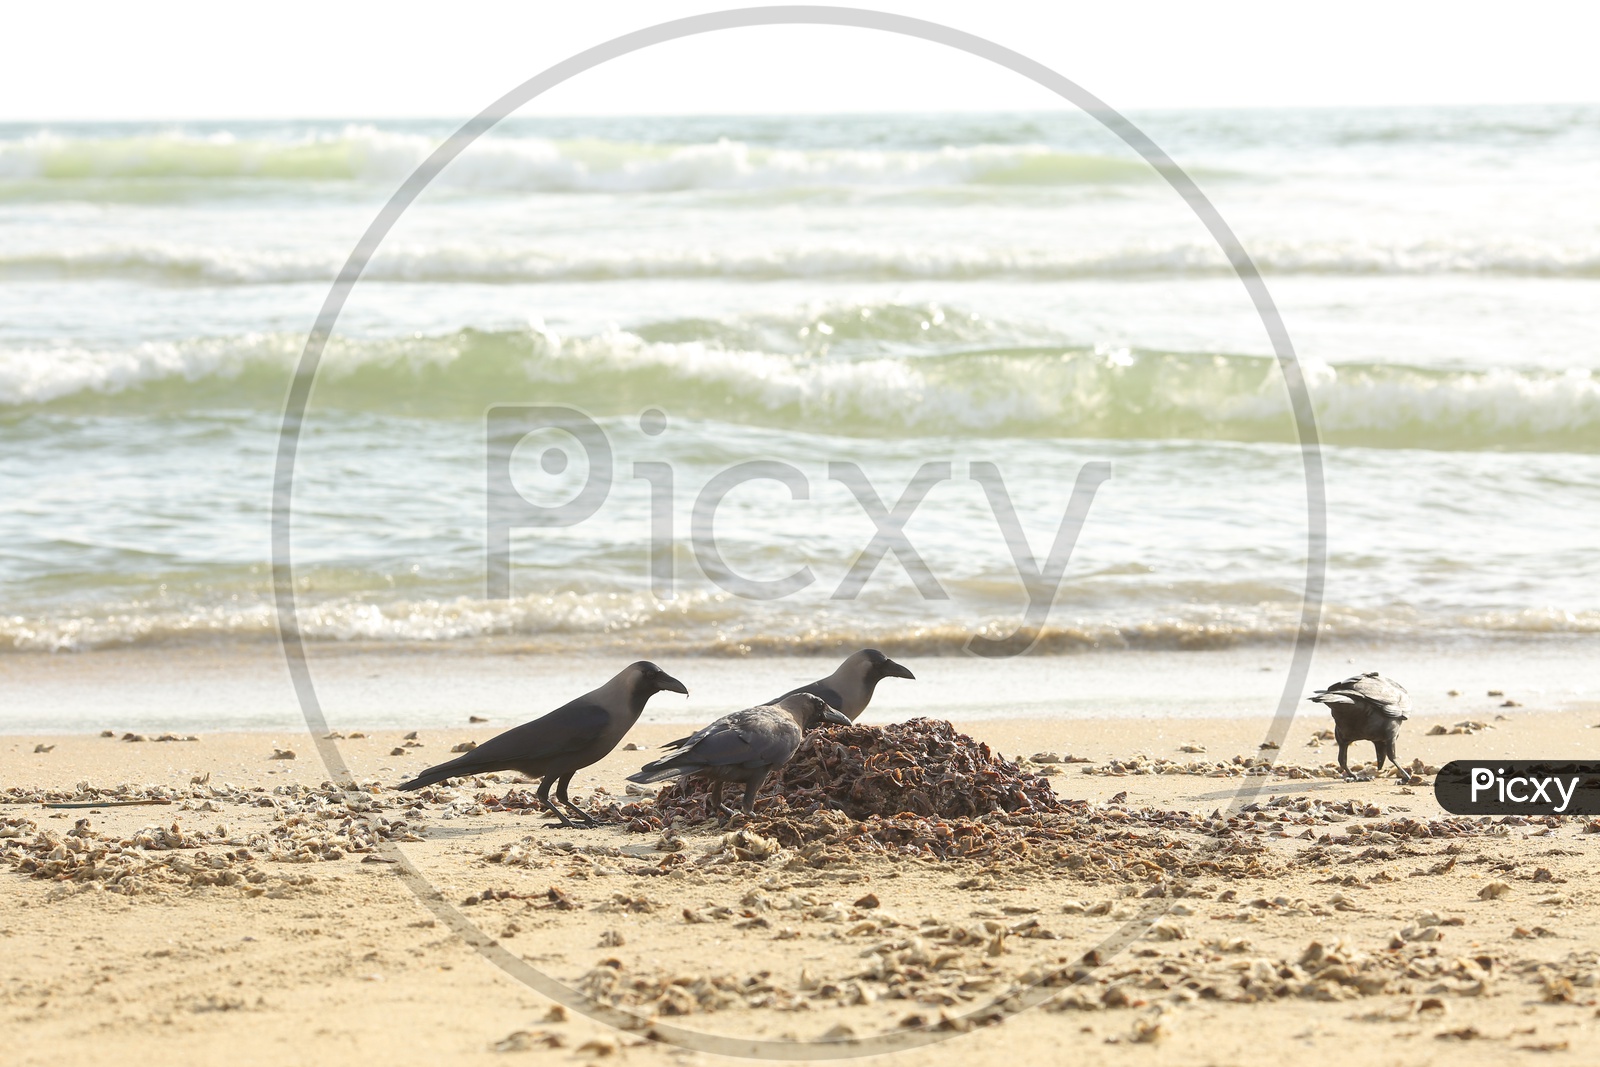 Crows Eating Died Aquatic Life In a Beach